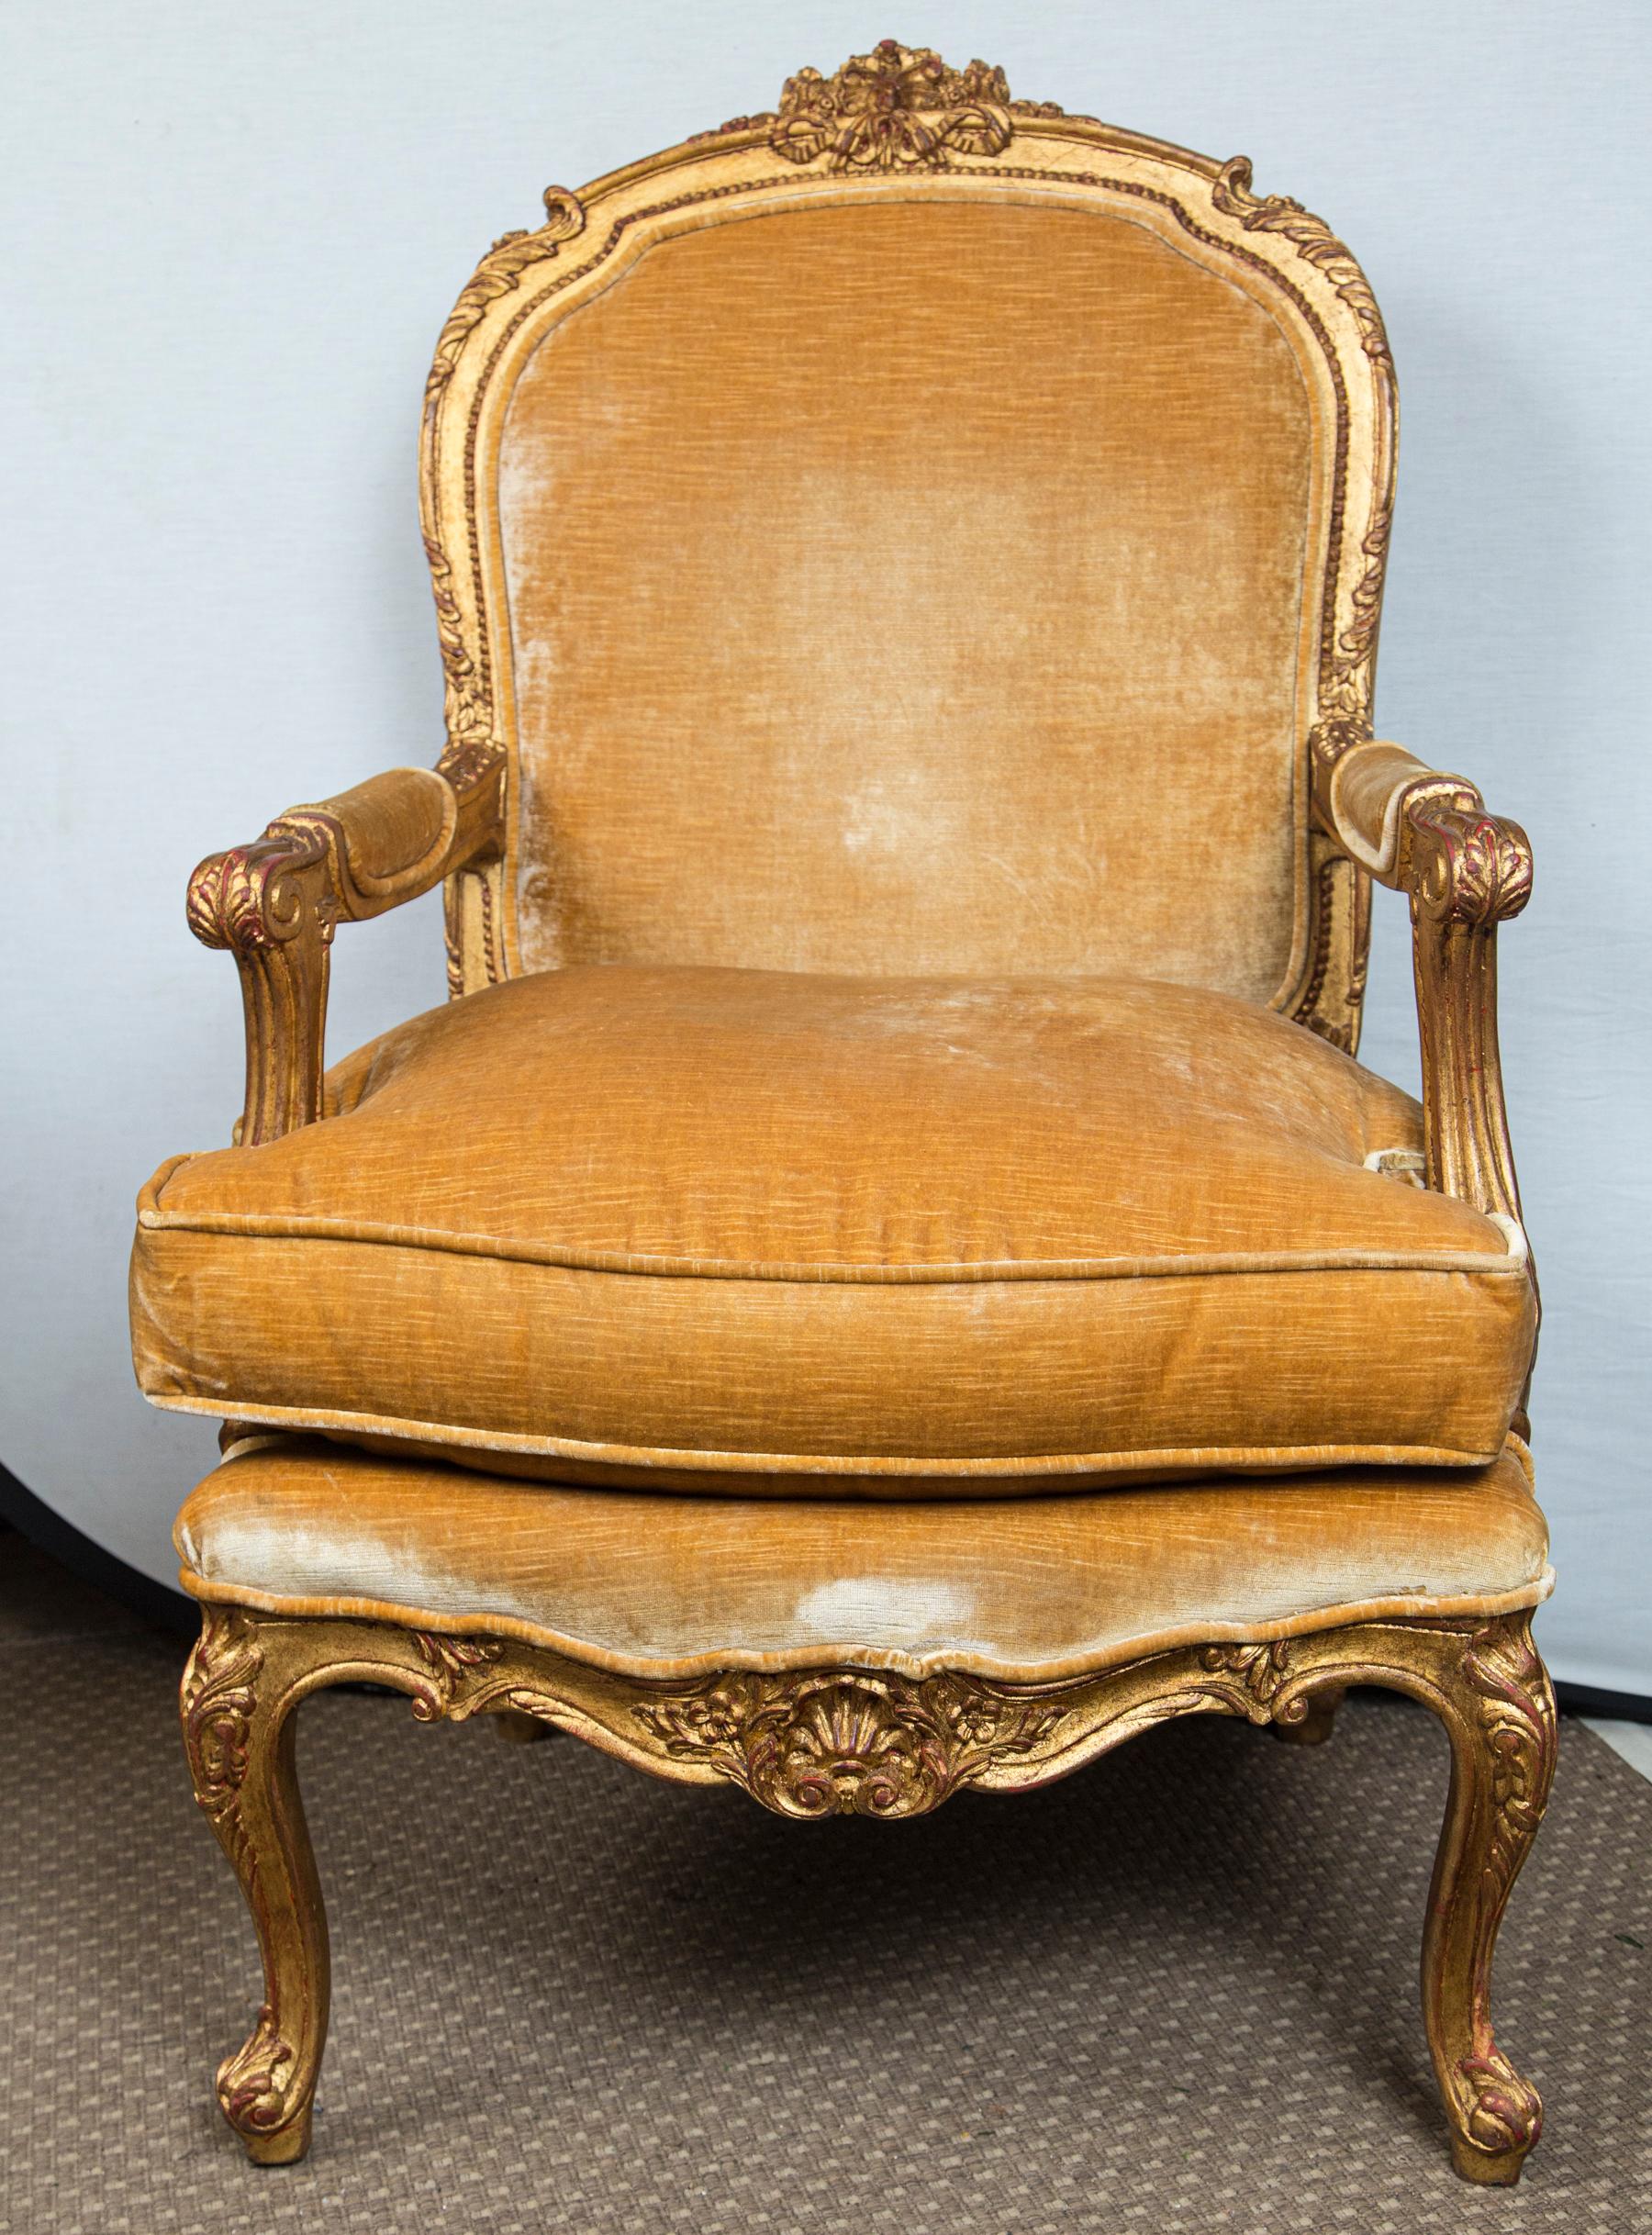 The hand craved frames gilded and painted. Upholstered in gold colored velvet. The areas in the photos that show a white color of the upholstery is the way the fabric photographs at certain angles. They look worn in the photos, but are not.
The